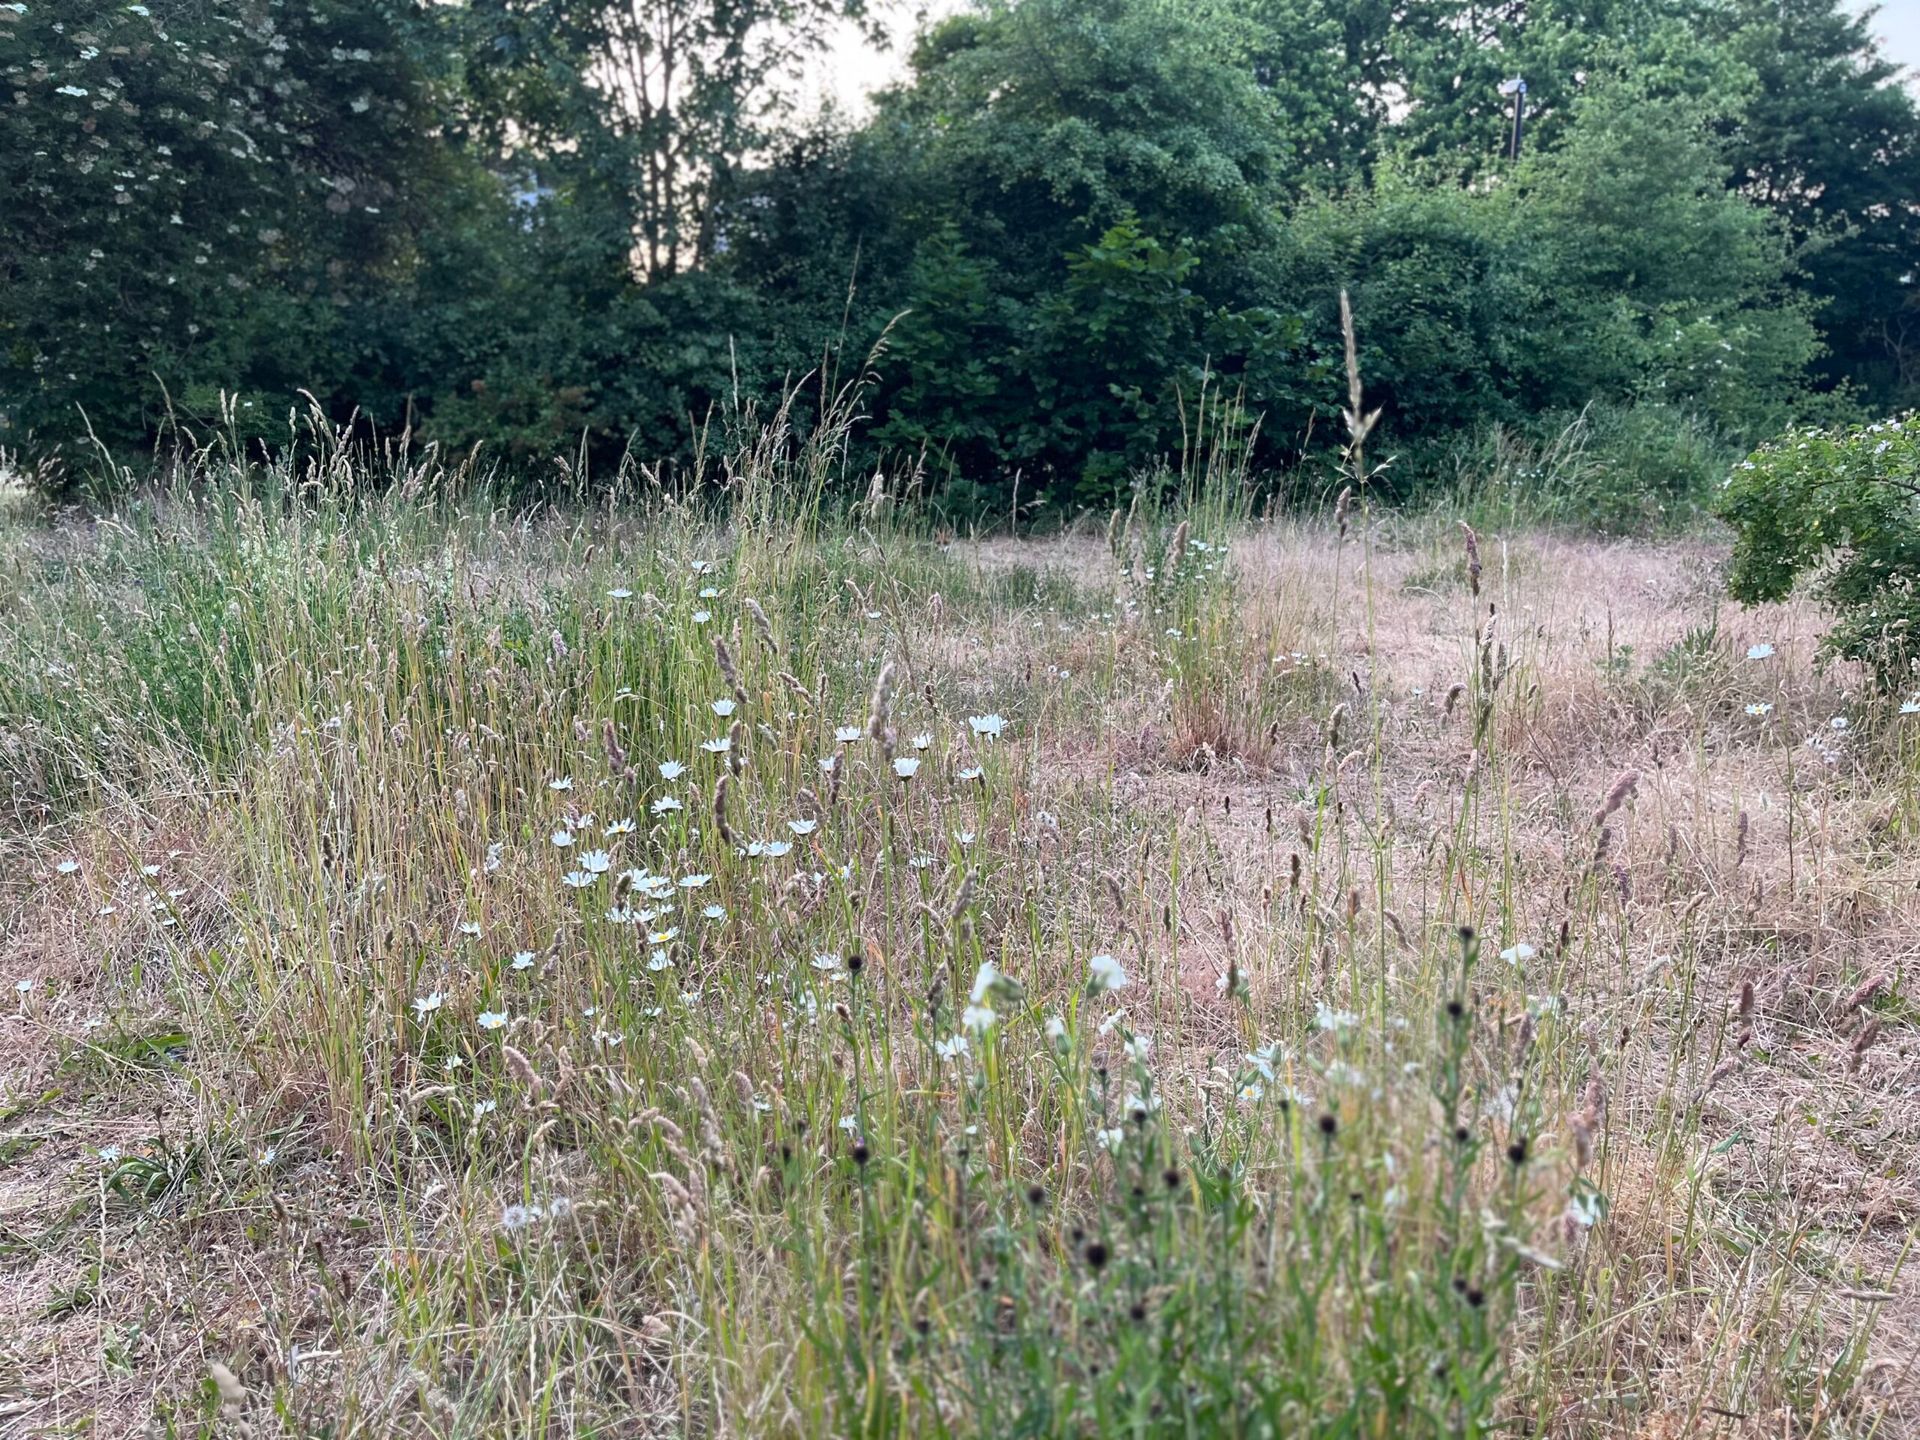 A meadow with large daisies and tall grass